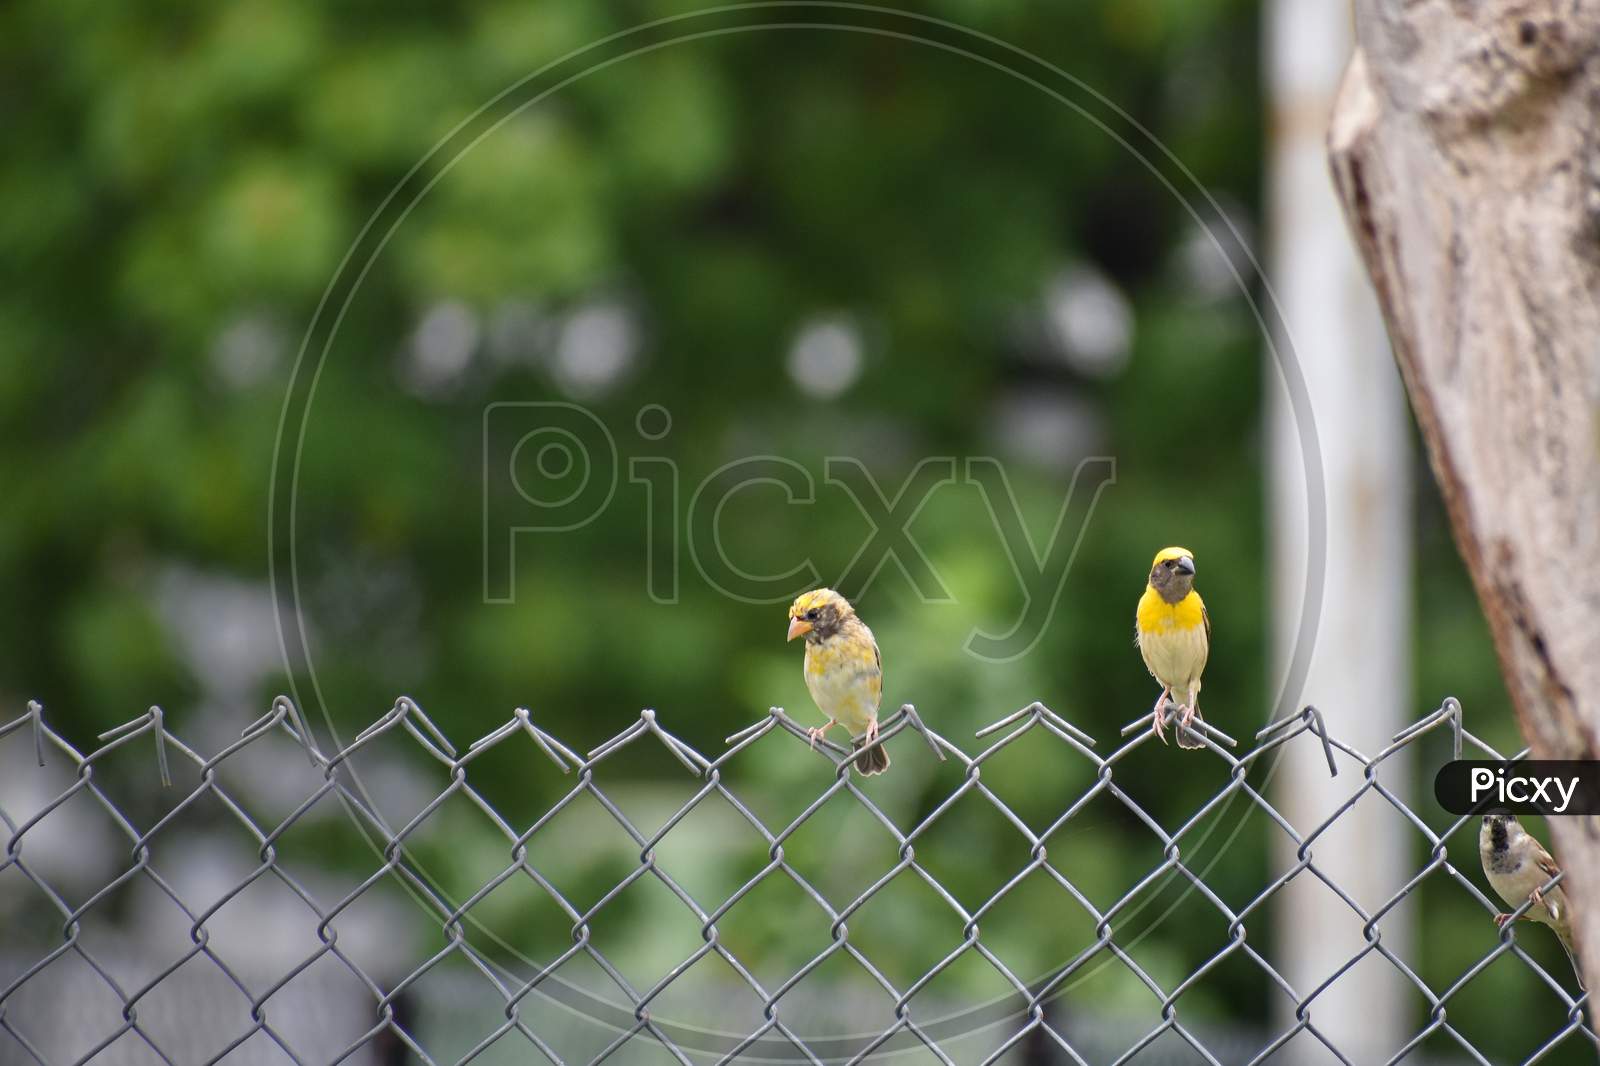 Two sparrows couple sitting on fence